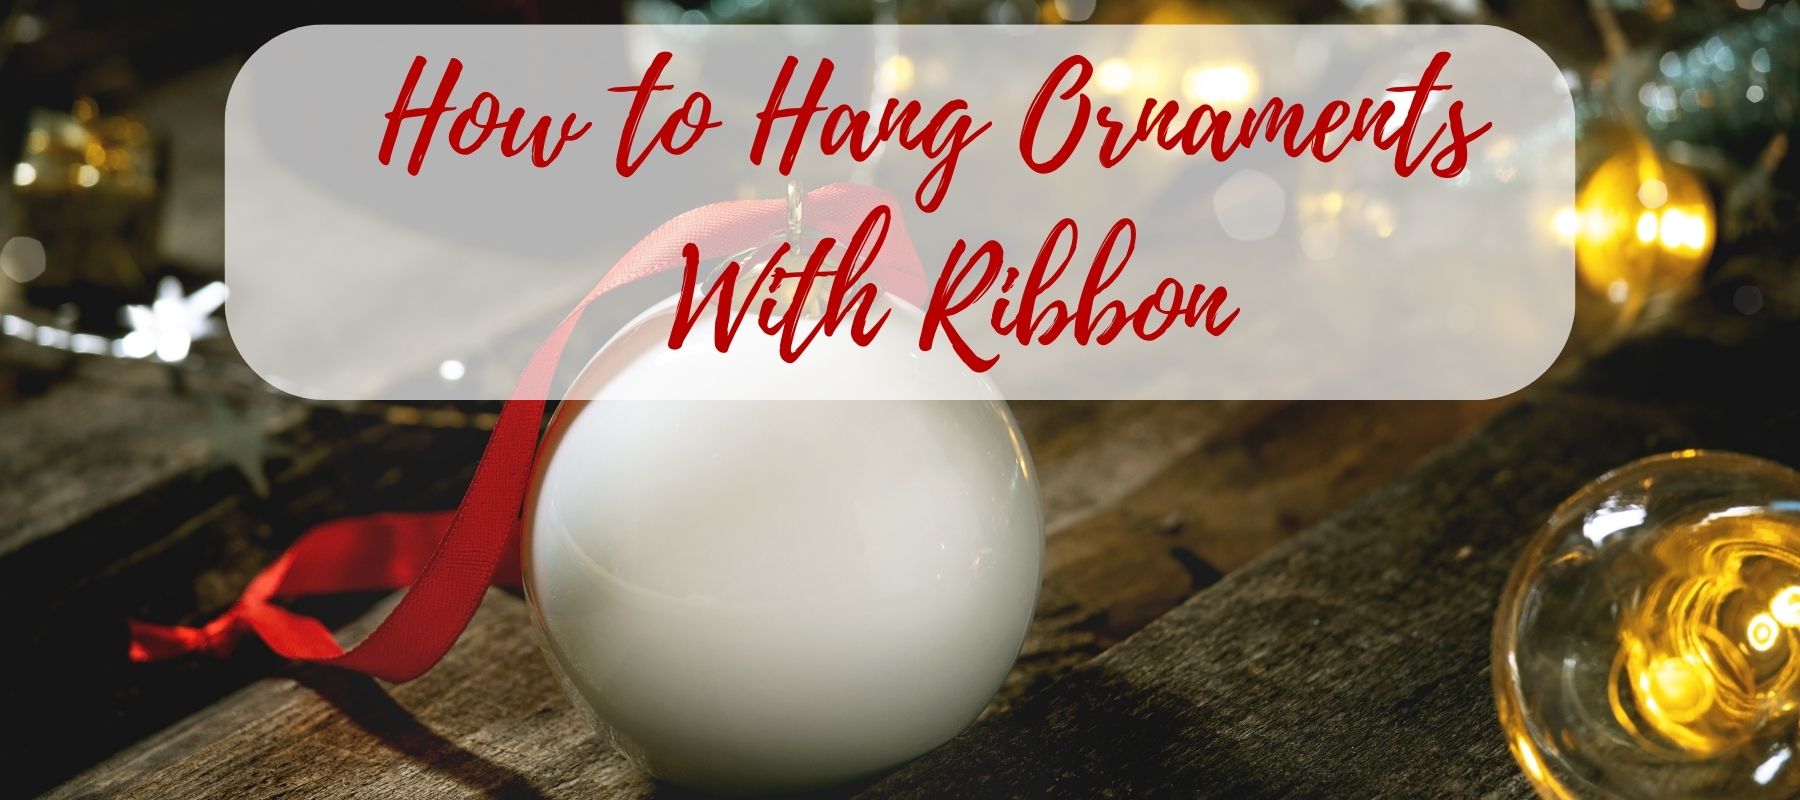 How to Hang Ornaments With Ribbon